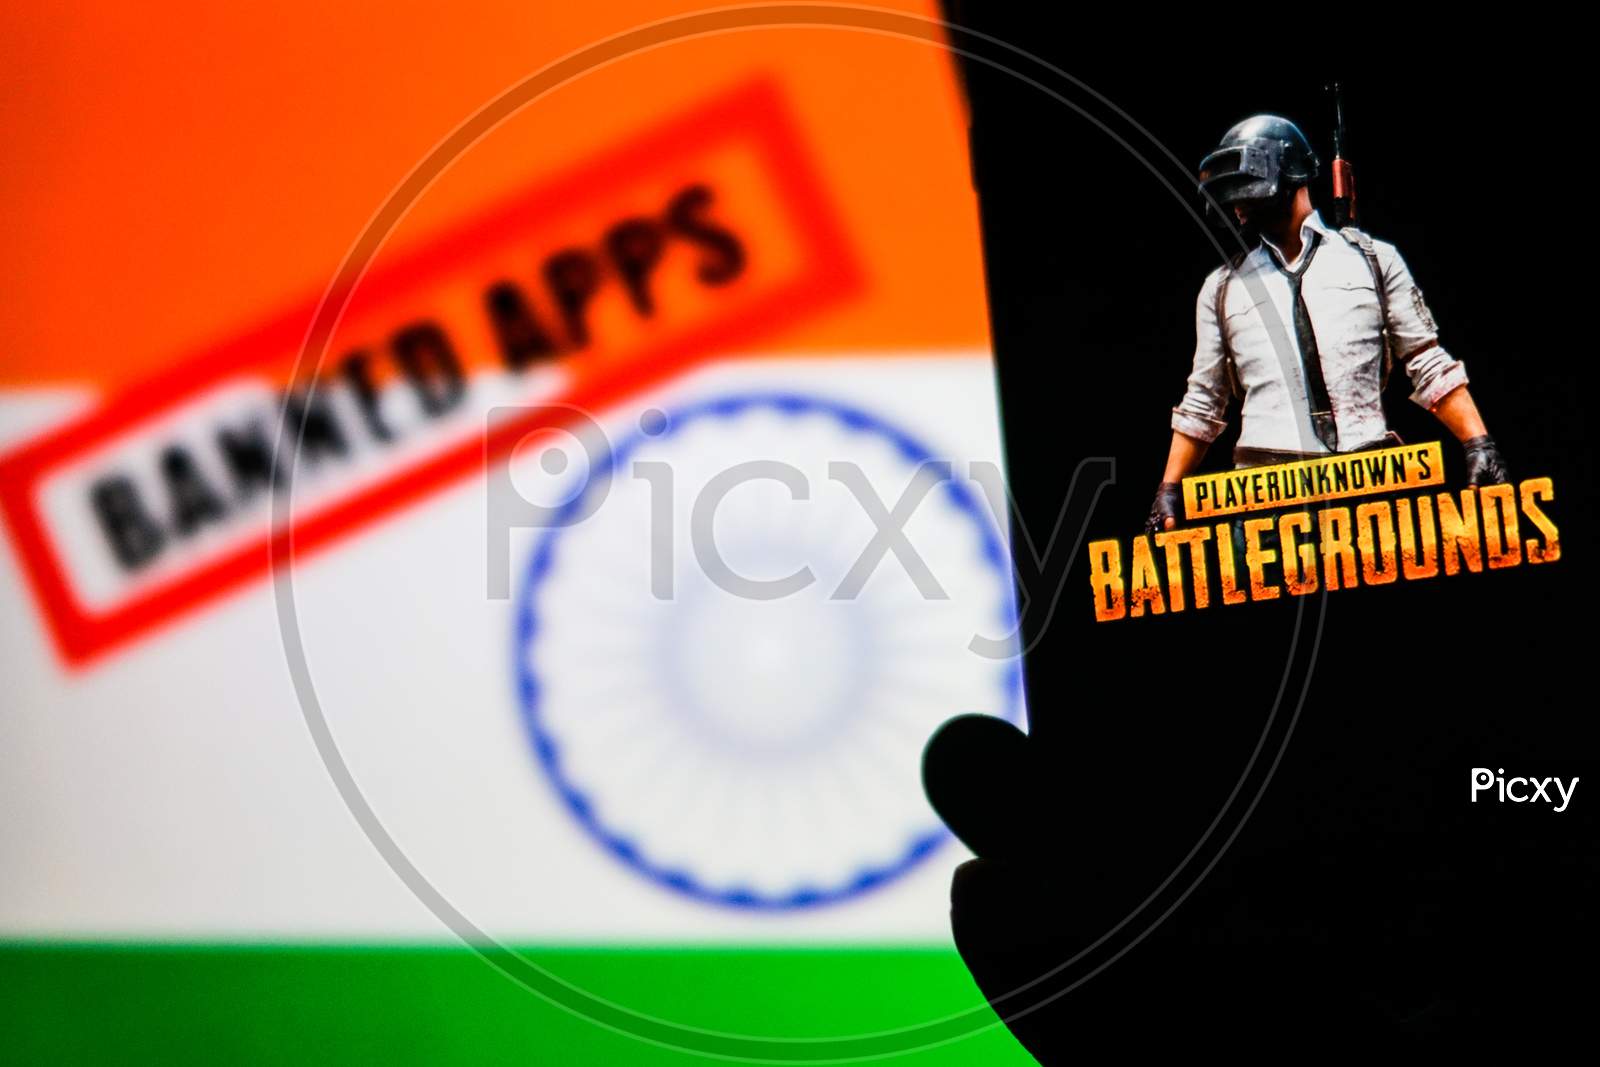 Banned PUBG or Playerunknown's BattlegroundsGame Logo on Smartphone Screen with Indian Flag in the Background